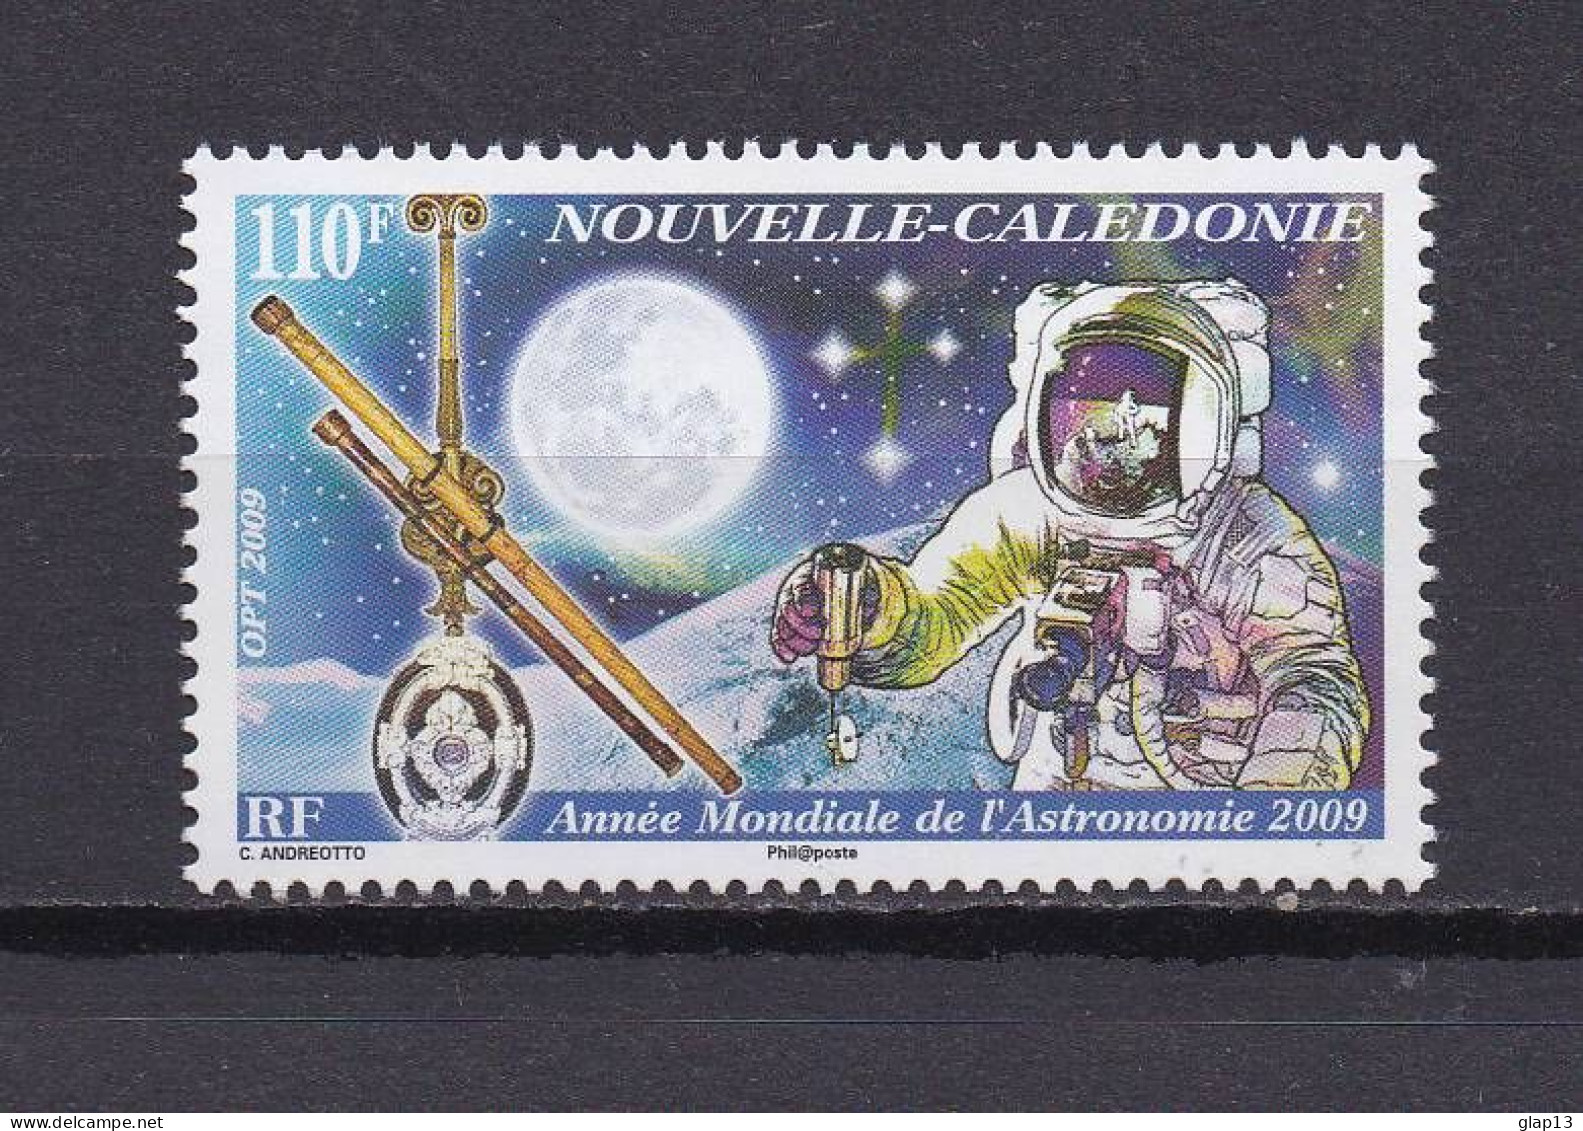 NOUVELLE-CALEDONIE 2009 TIMBRE N°1073 NEUF** ASTRONOMIE - Unused Stamps